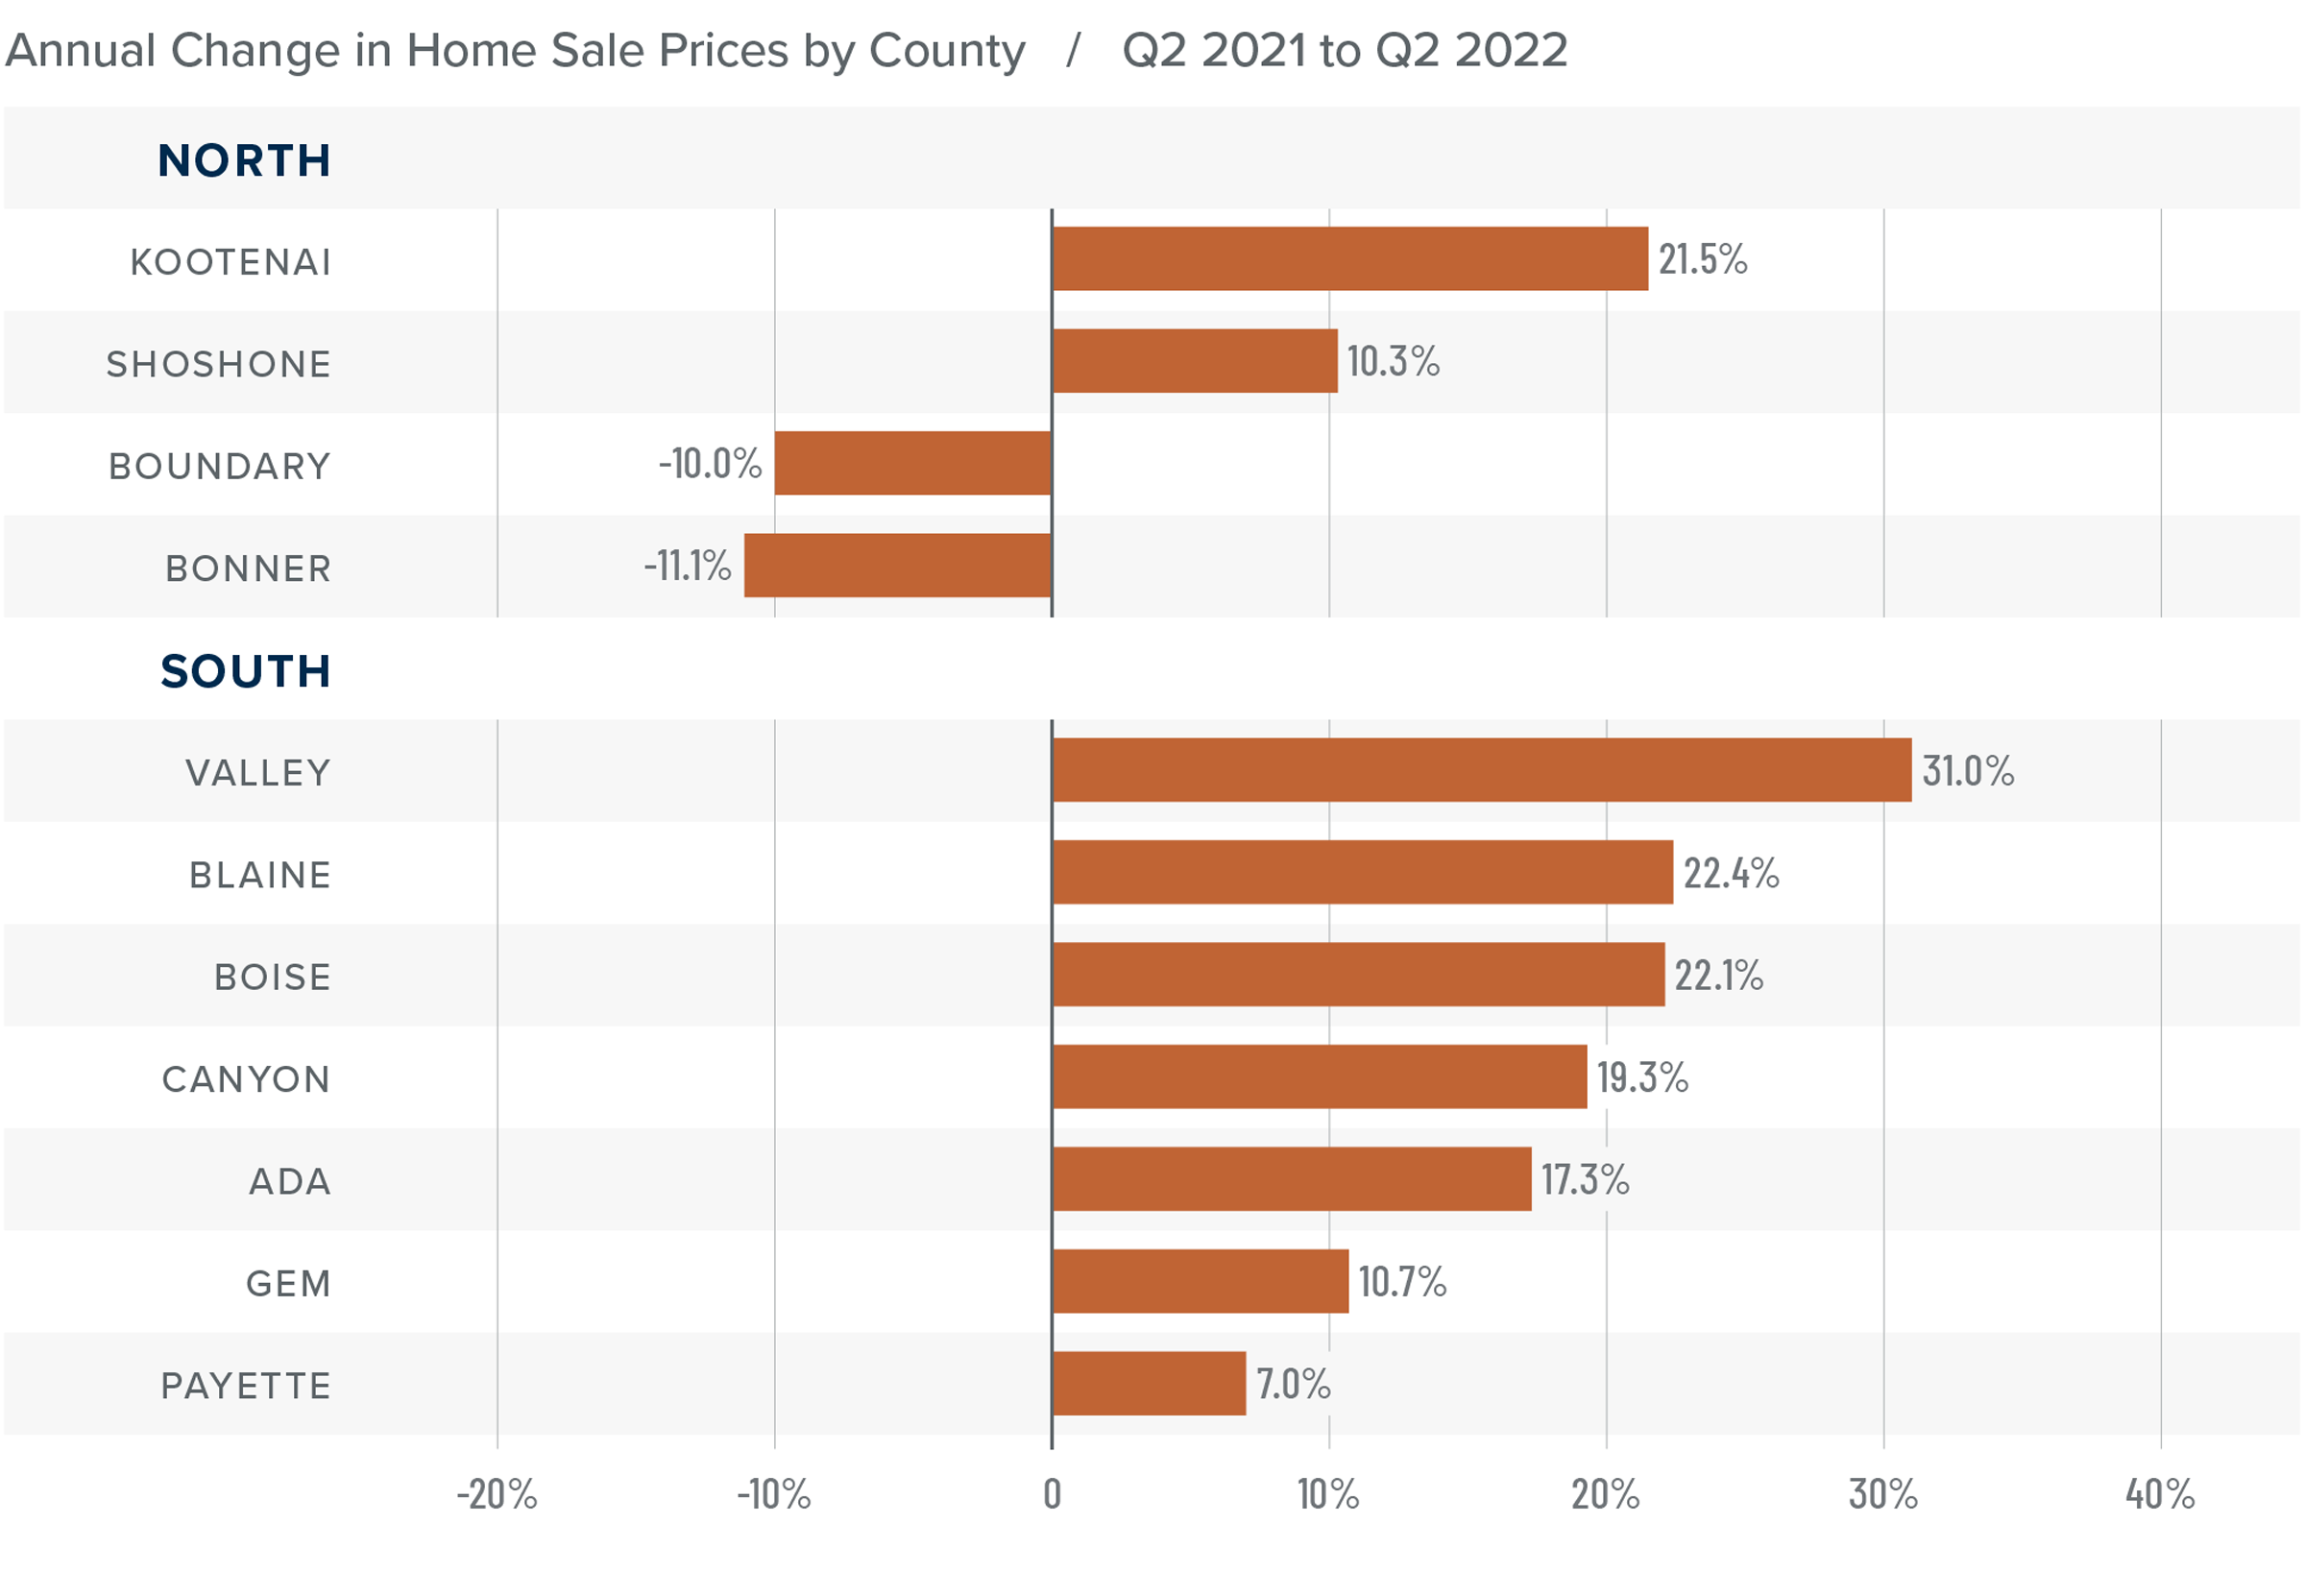 A bar graph showing the annual change in home sale prices for various counties in North and South Idaho from Q2 2021 to Q2 2022. In North Idaho, Kootenai County tops the list at 21.5%, followed by Shoshone at 10.3%, Boundary at -10%, and Bonner at -11.1%. In South Idaho, Valley showed the greatest positive change at 31%, followed by Blaine at 22.4%, Boise at 22.1%, Canyon at 19.3%, Ada at 17.3%, Gem at 10.7, and Payette County at 7%.